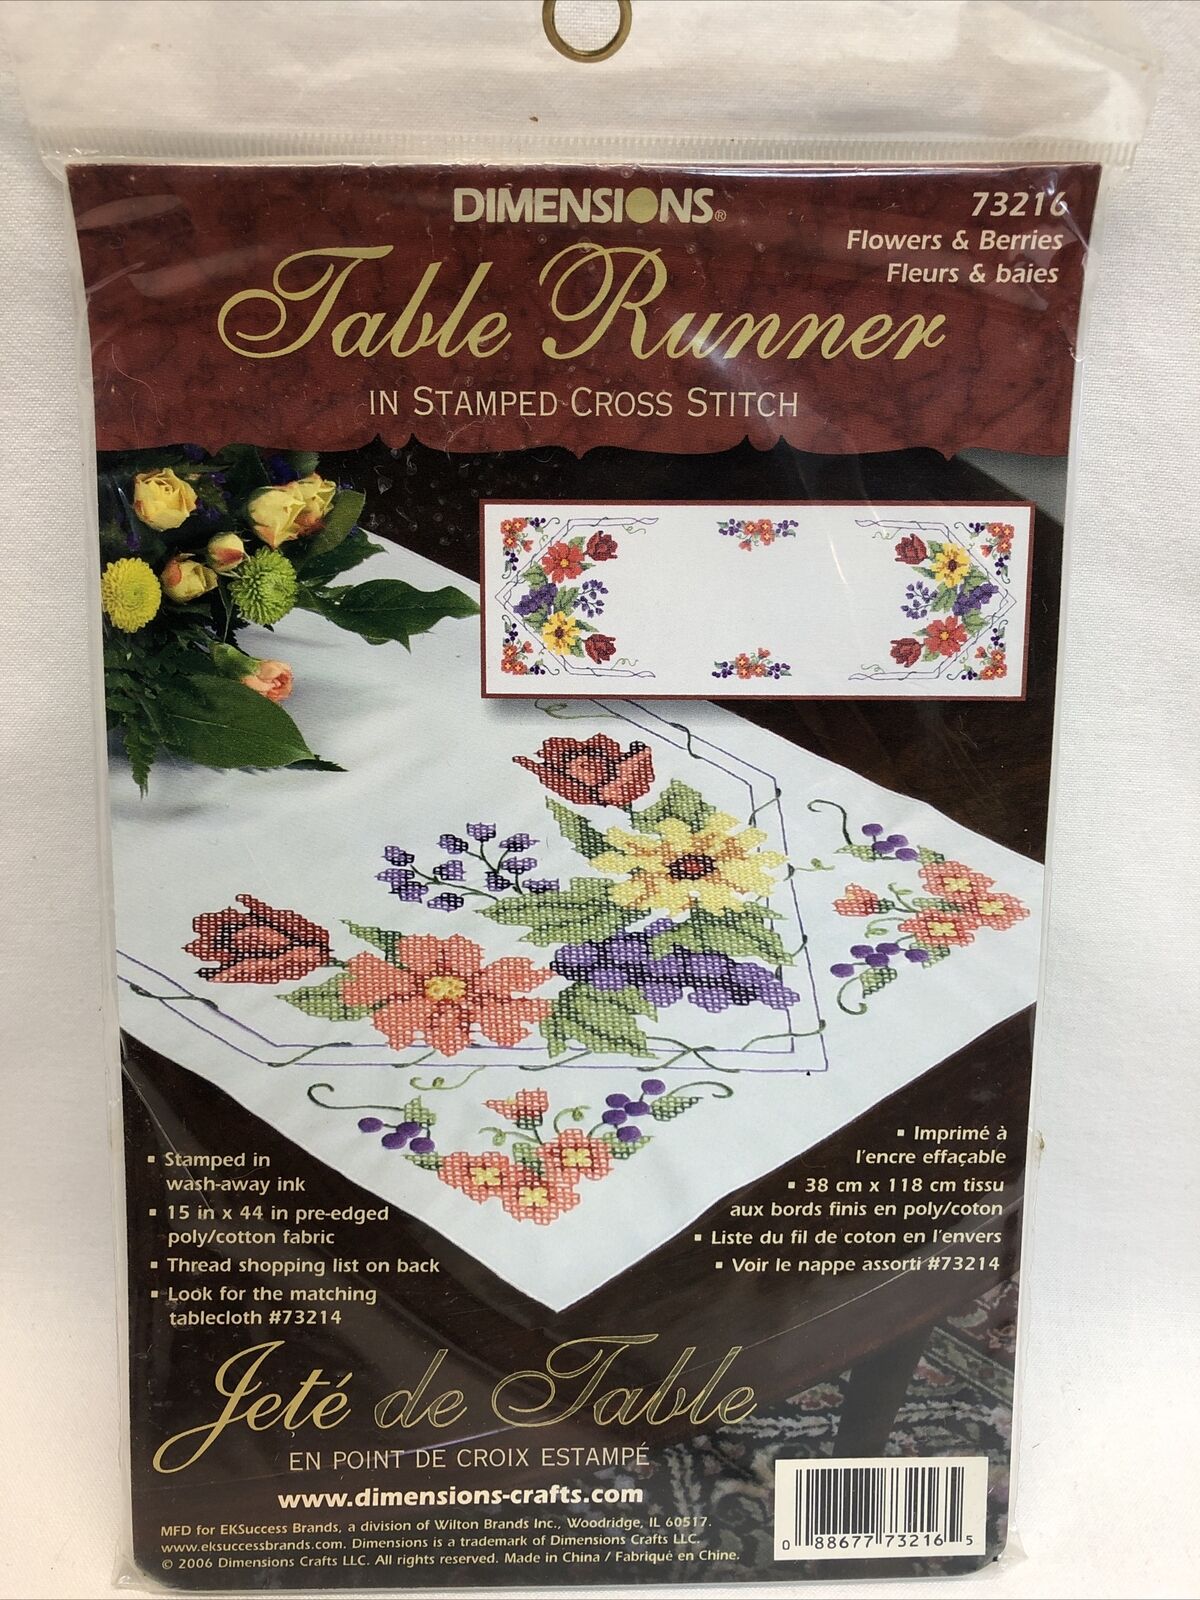 NEW - Dimensions “FLOWERS & BERRIES” Table Runner Stamped Cross Stitch 73272